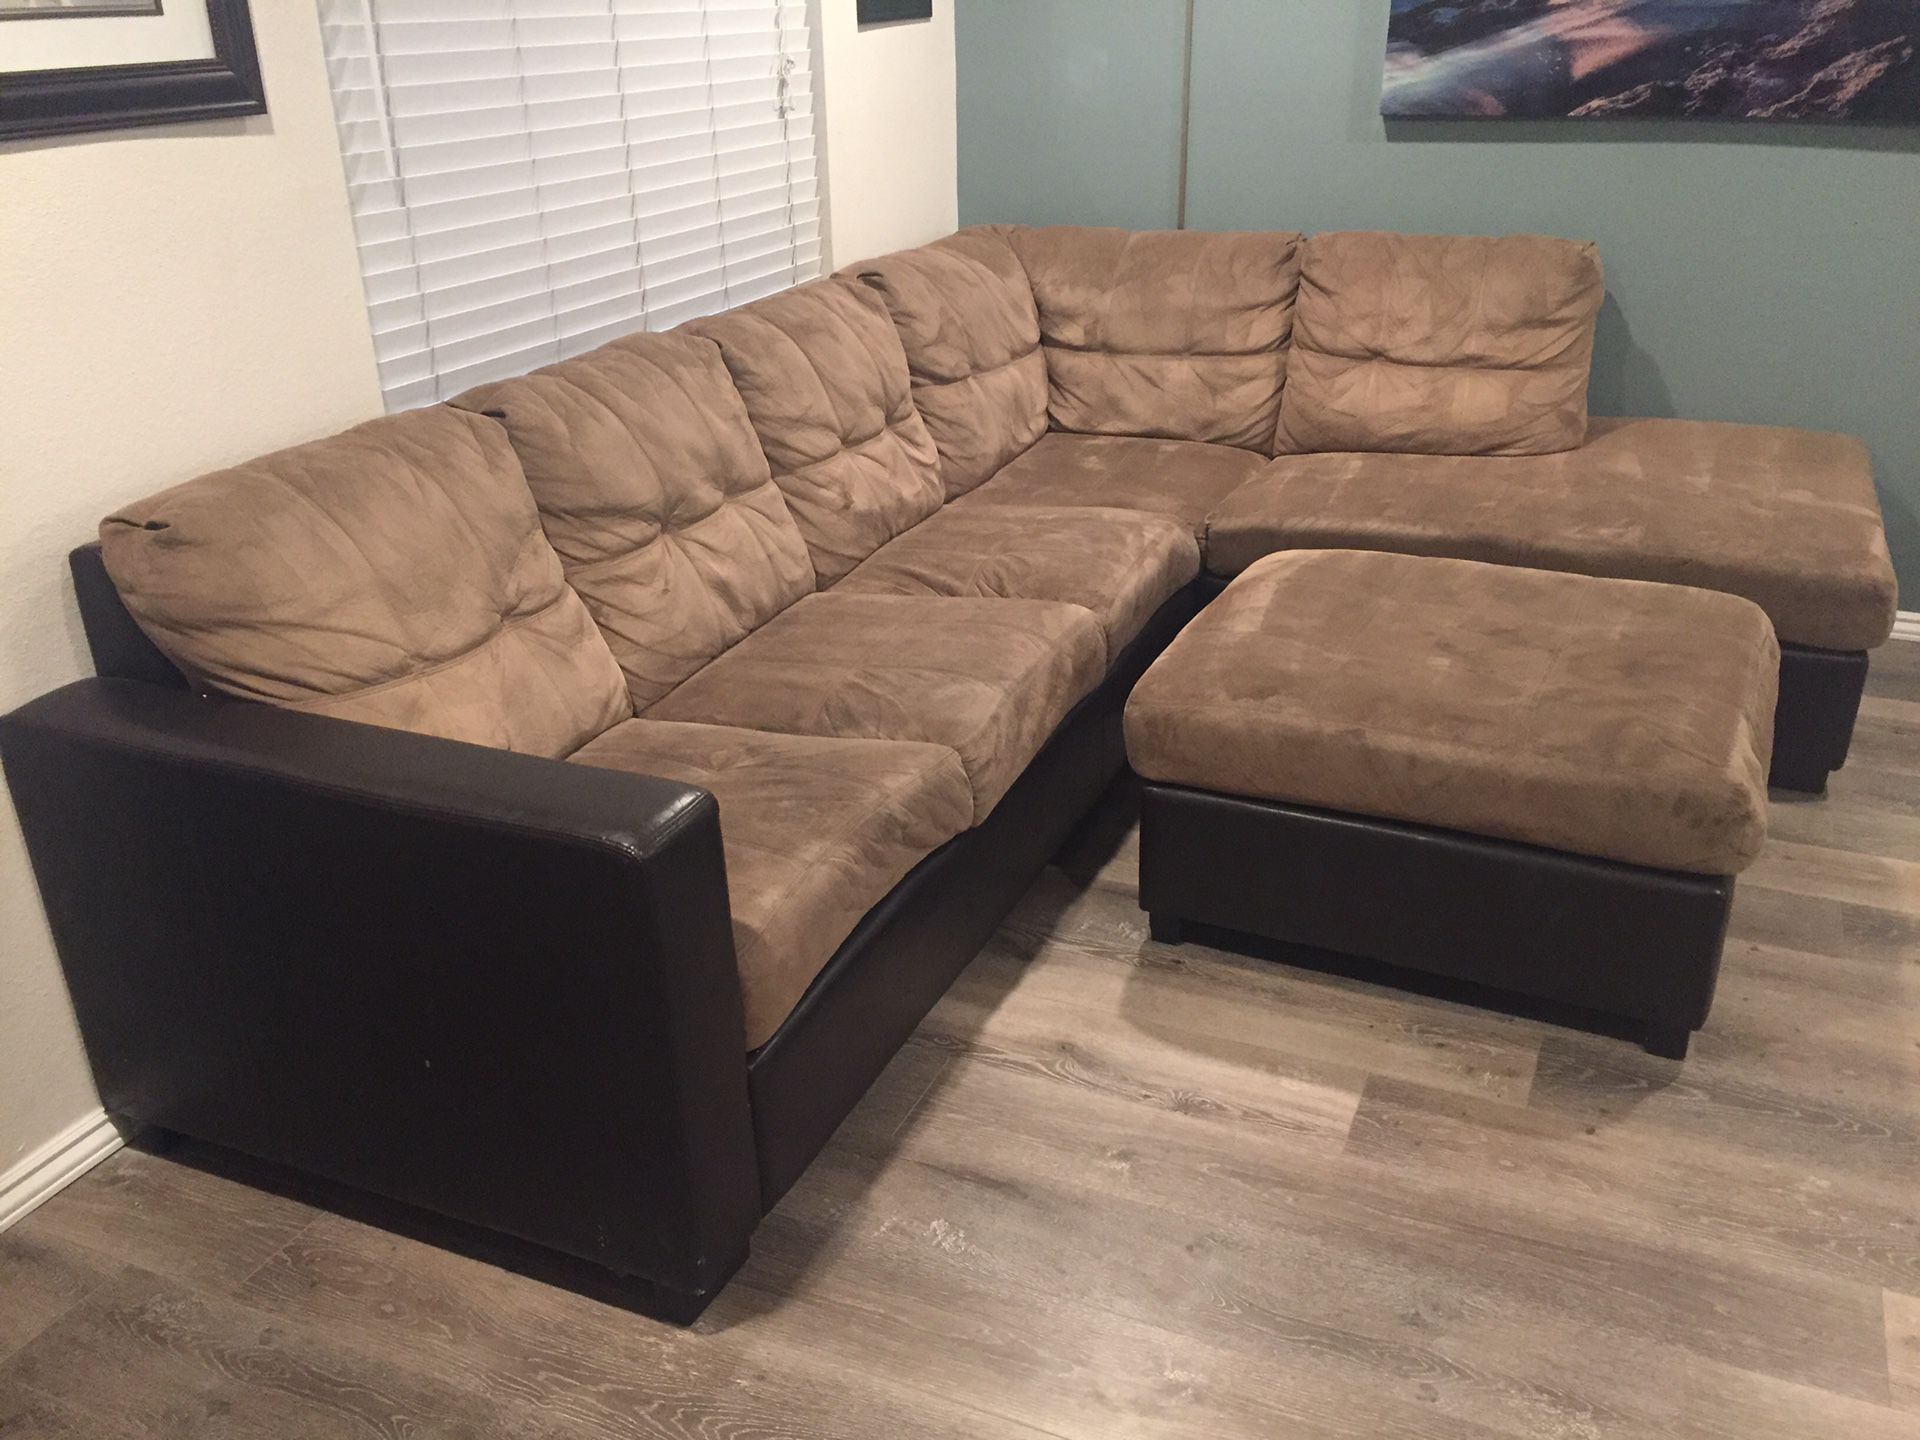 Beige & black sectional couch sofa + Ottoman! - Priced to sell!